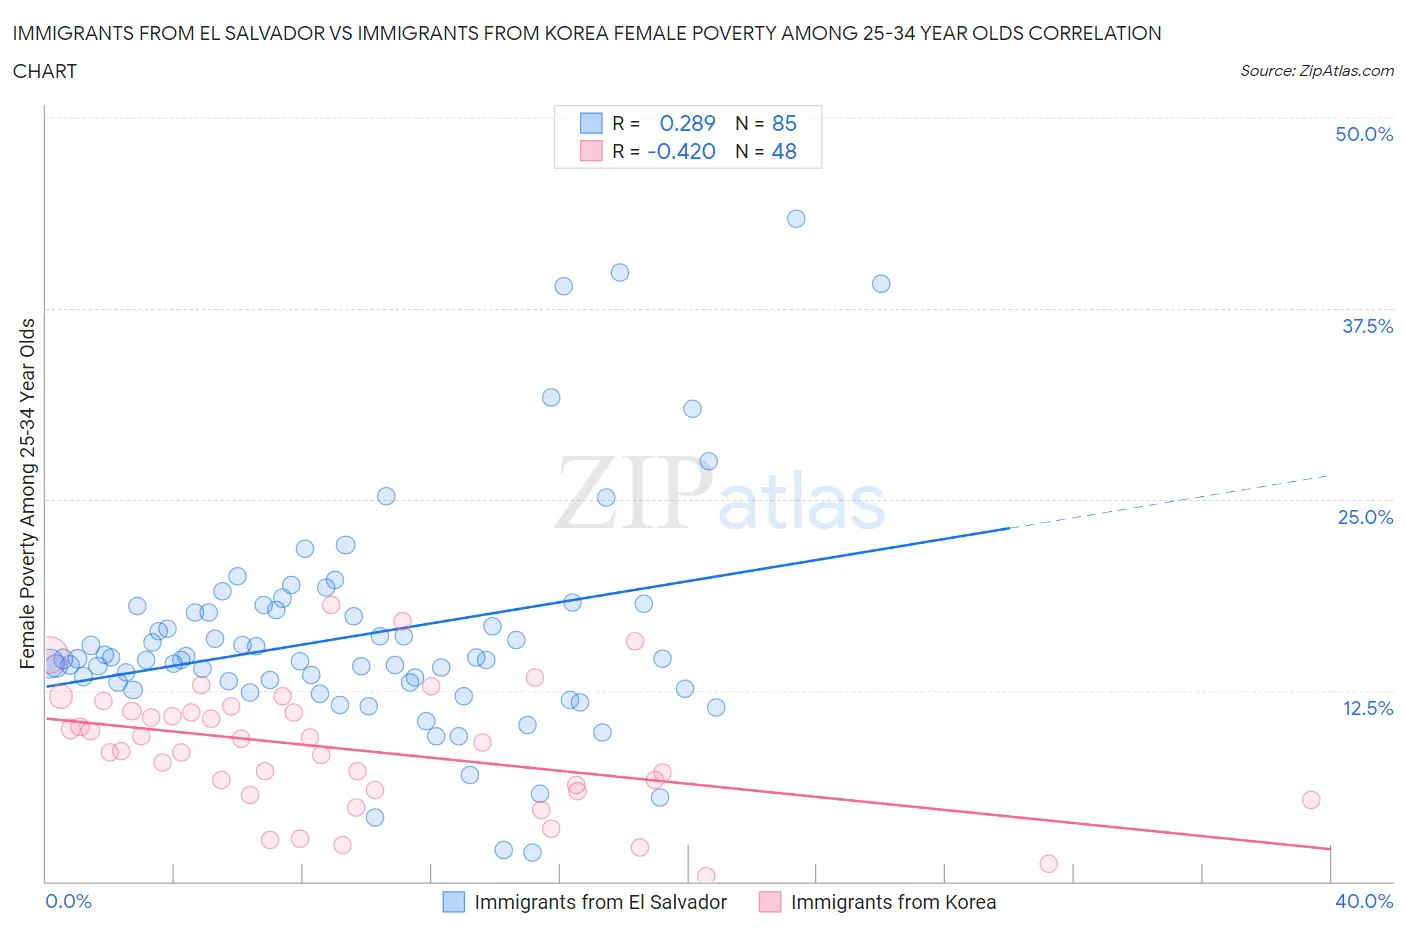 Immigrants from El Salvador vs Immigrants from Korea Female Poverty Among 25-34 Year Olds